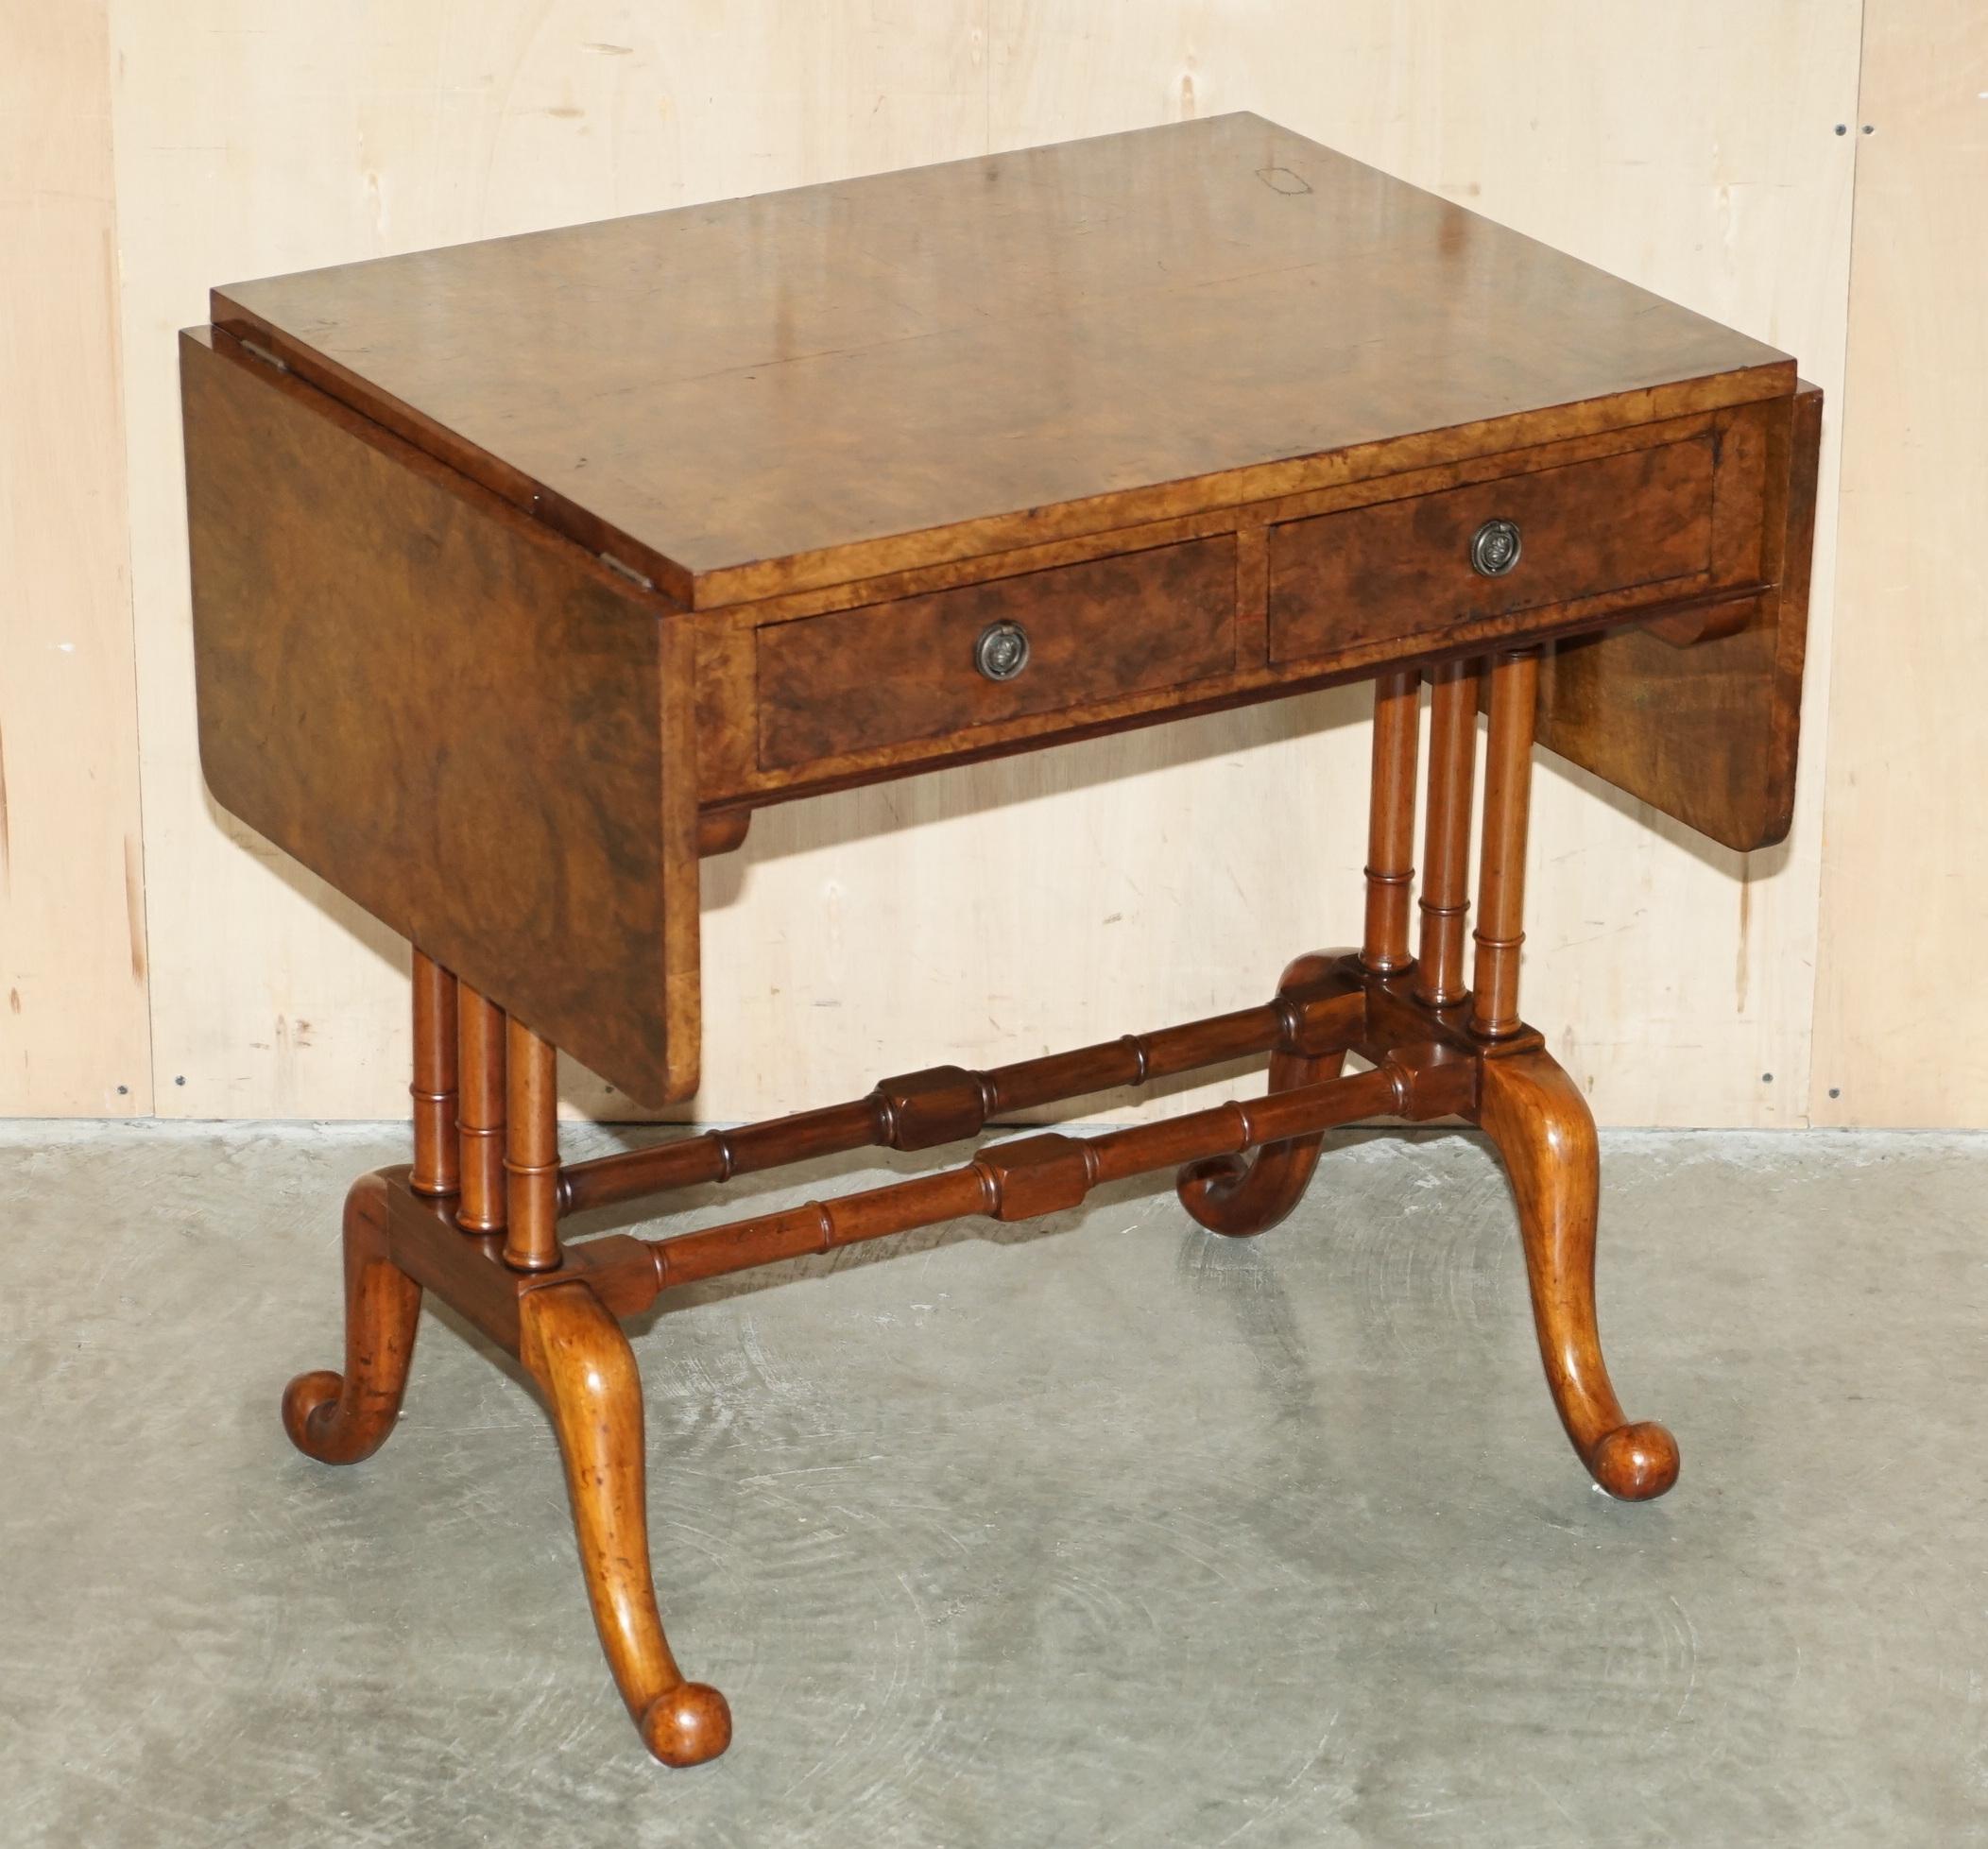 Royal House Antiques

Royal House Antiques is delighted to offer for sale this absolutely exquisite circa 1880-1900 burr walnut extending sofa table

Please note the delivery fee listed is just a guide, it covers within the M25 only for the UK and